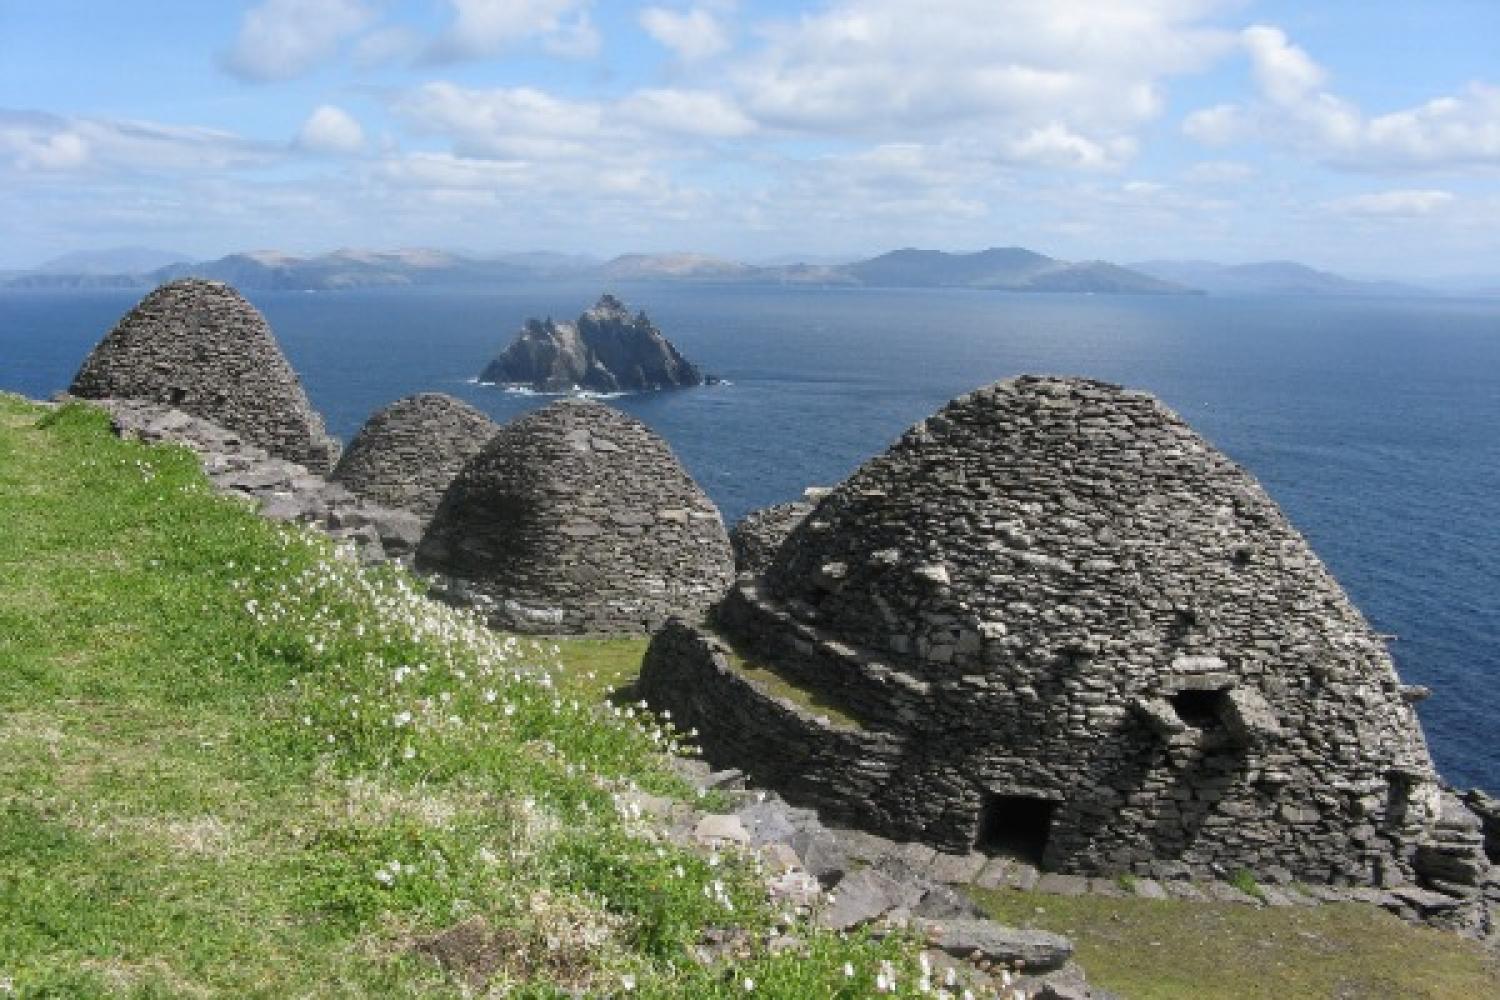 Monastic cells high above the sea on Skellig Michael, with Little Skellig and the coast of County Kerry, Ireland, in the distance.